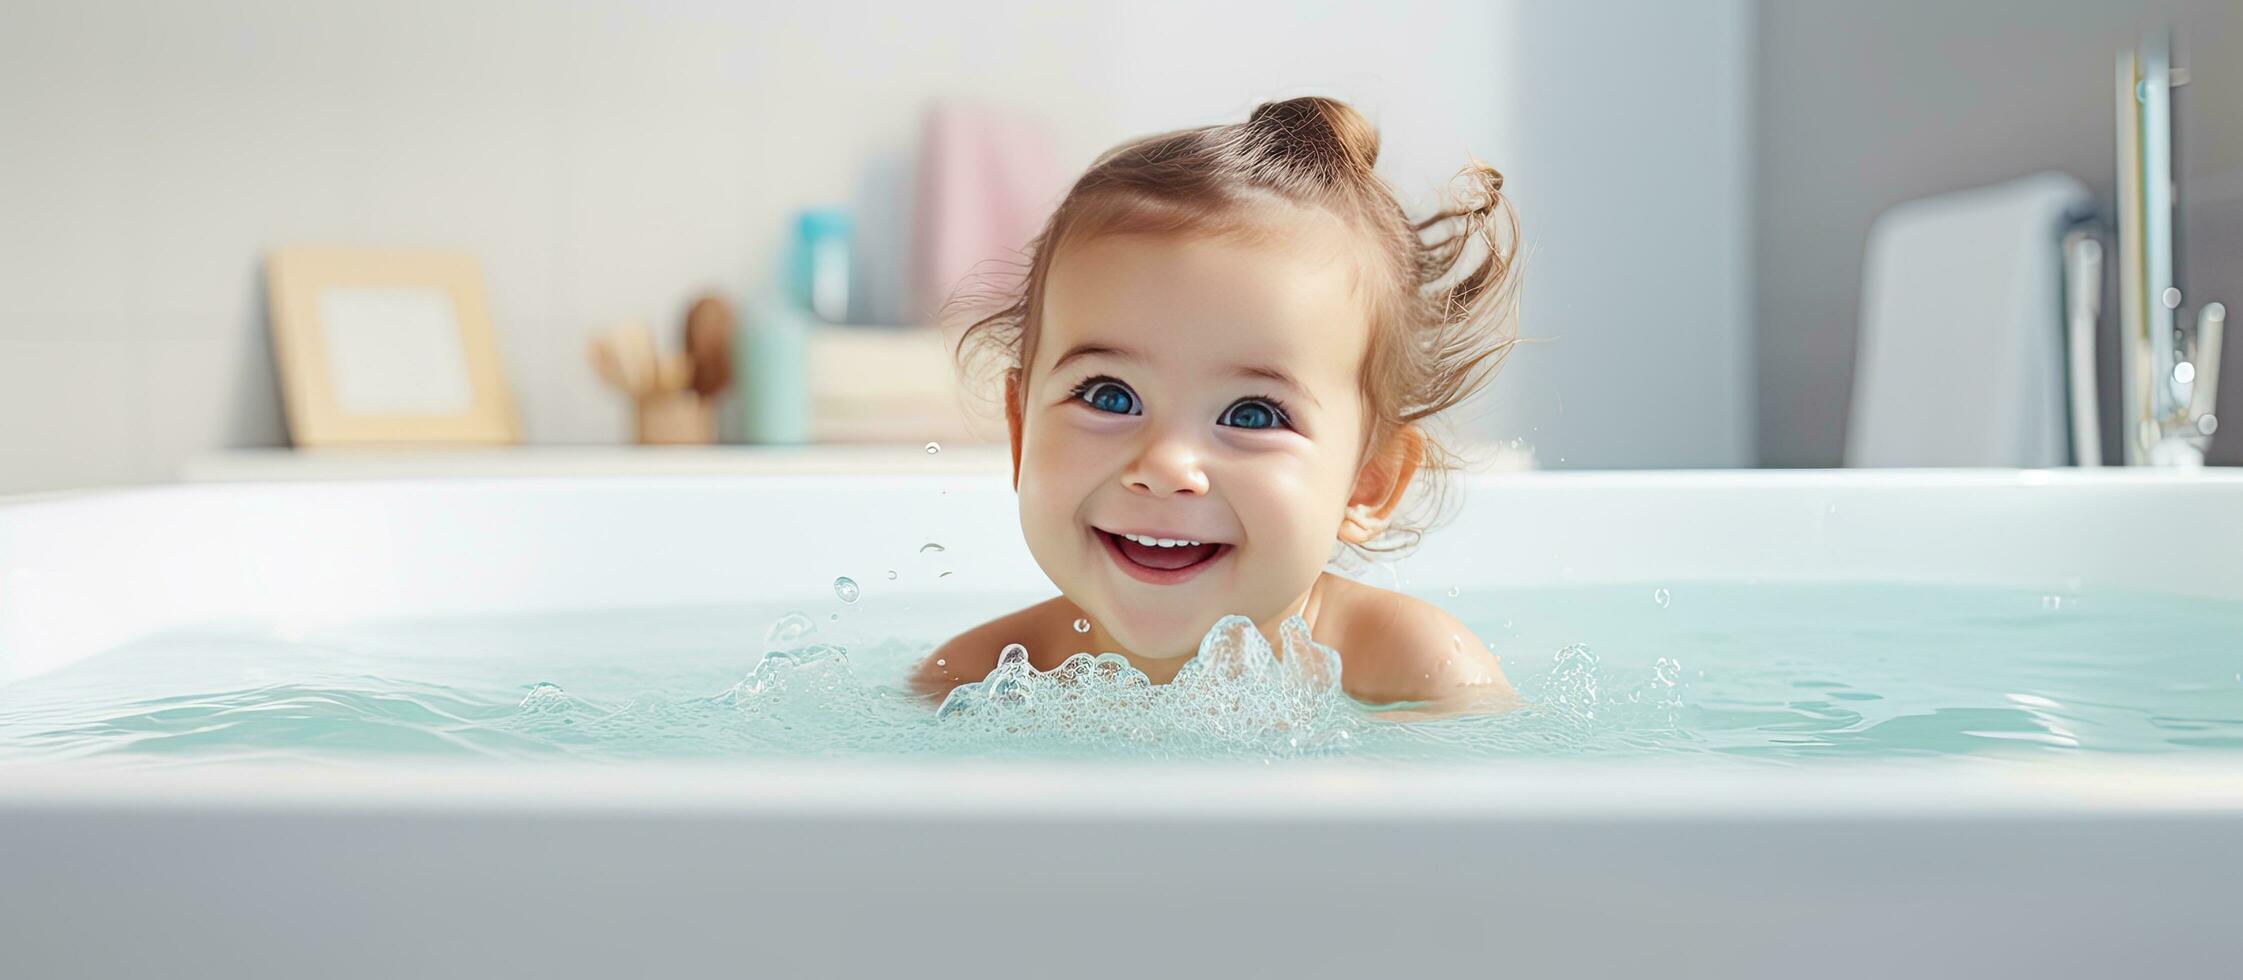 Happy Caucasian baby girl enjoying a playful bath at home promoting growth and happiness photo